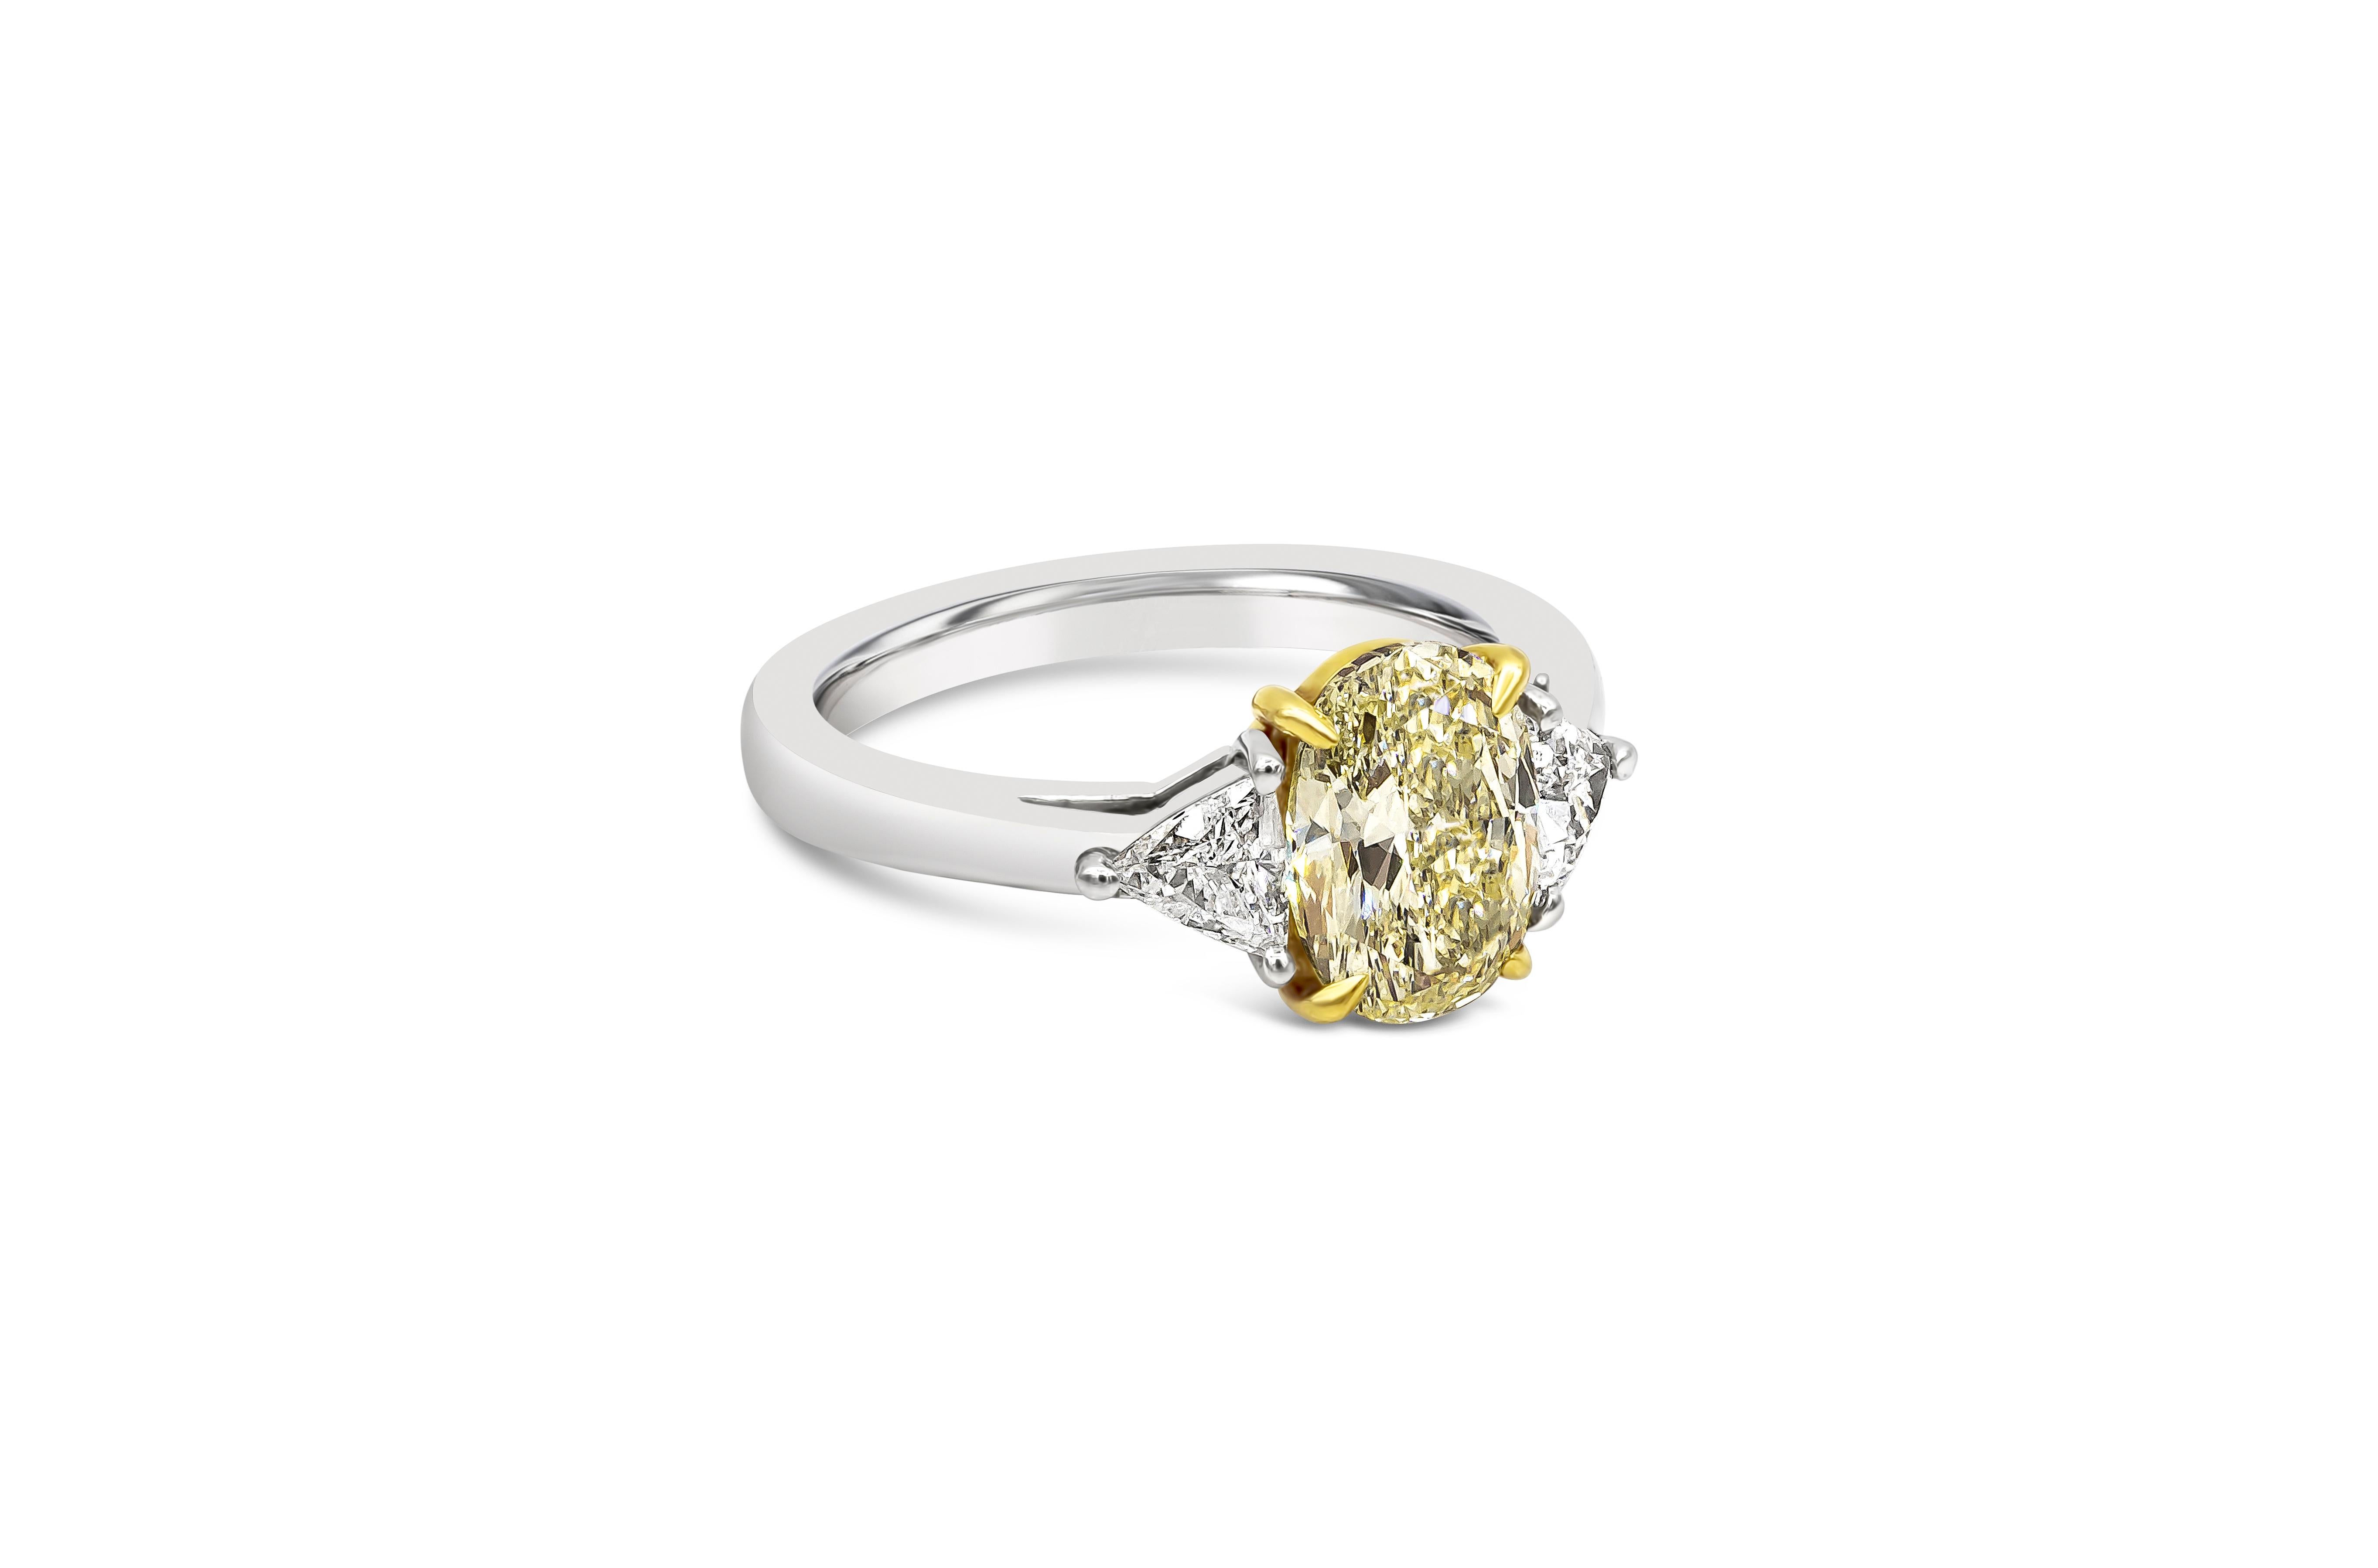 A contemporary three-stone engagement ring style, showcasing a 1.87 carat oval cut yellow diamond certified by GIA as Fancy Light Yellow color and SI1 clarity. Flanking the center diamond are two brilliant cut trillion diamonds weighing 0.47 carats